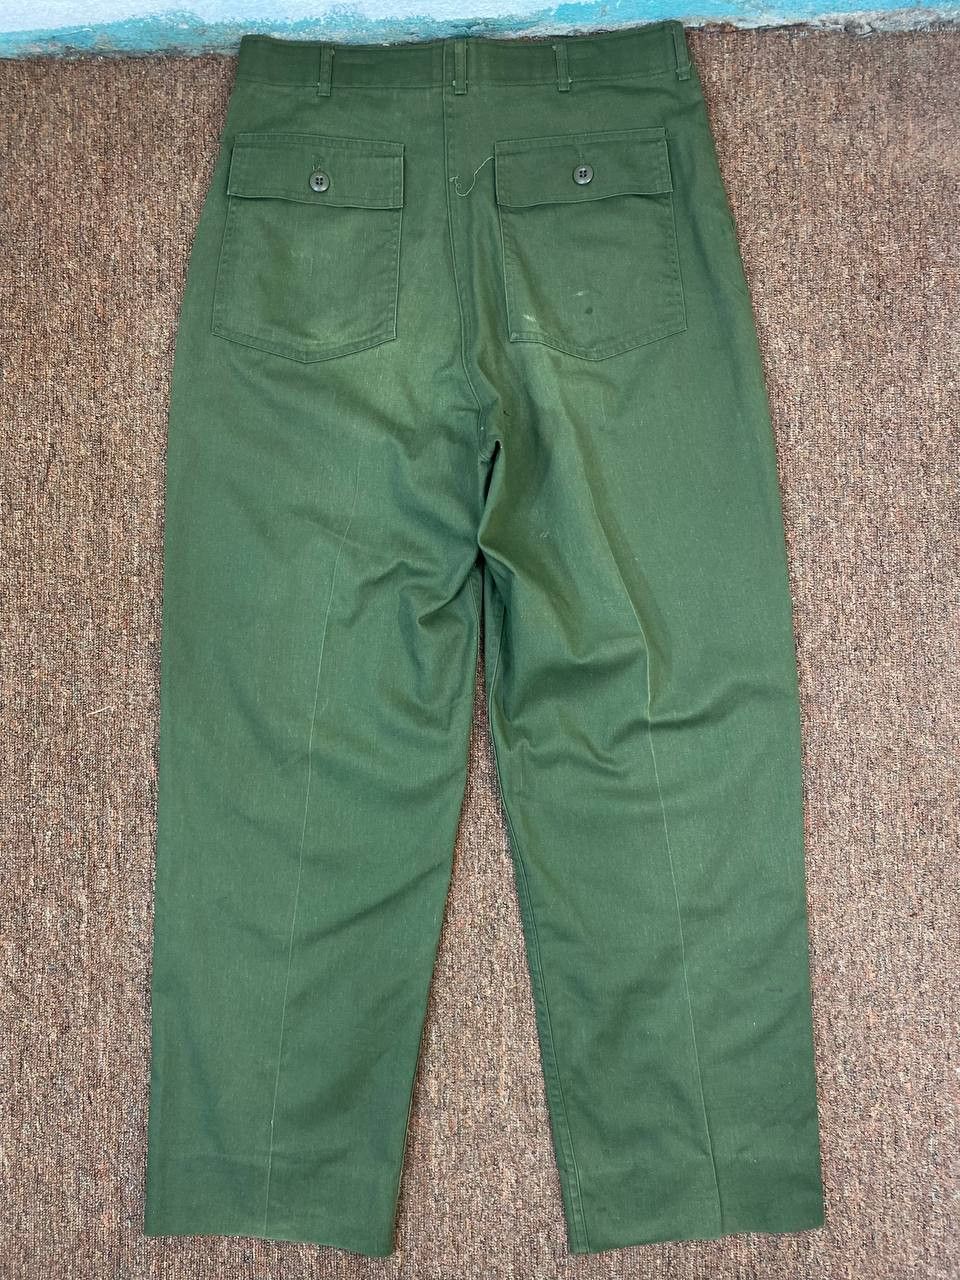 VINTAGE 1950'S HEAVY GREEN WOOL MILITARY PANTS 34 INCH WAIST 28 INCH INSEAM